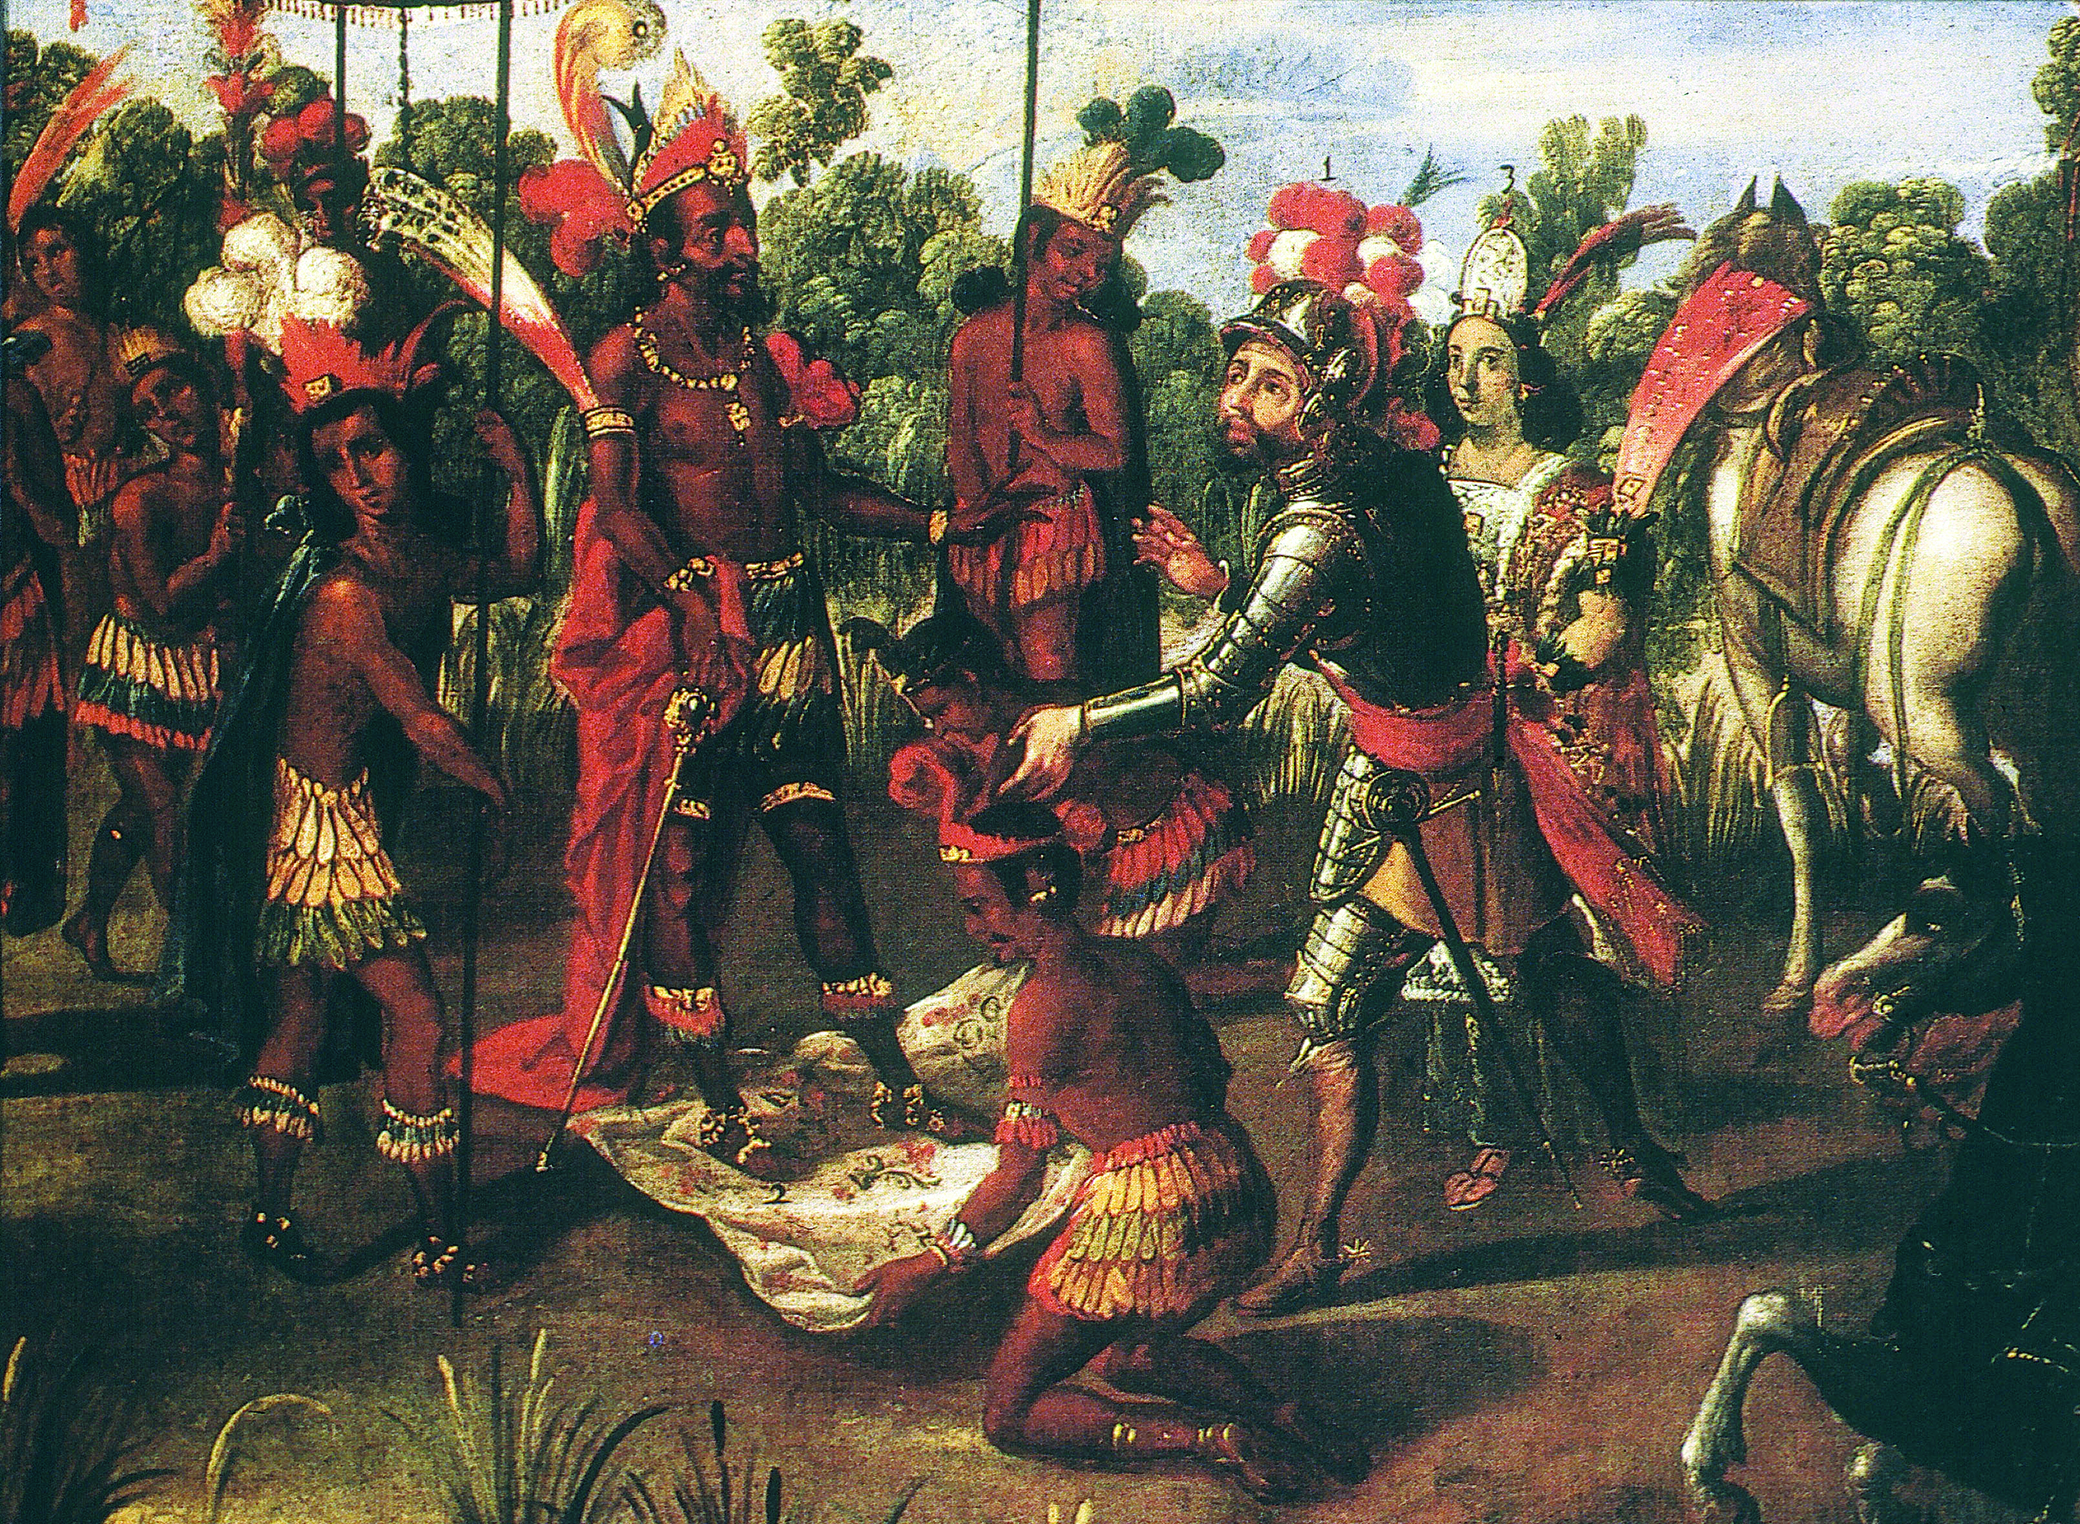 The Meeting of Cortés and Moctezuma, from the Conquest of México series, Mexico, second half of seventeenth century. Library of Congress, Rare Book and Special Collections Division, Jay I. Kislak Collection.